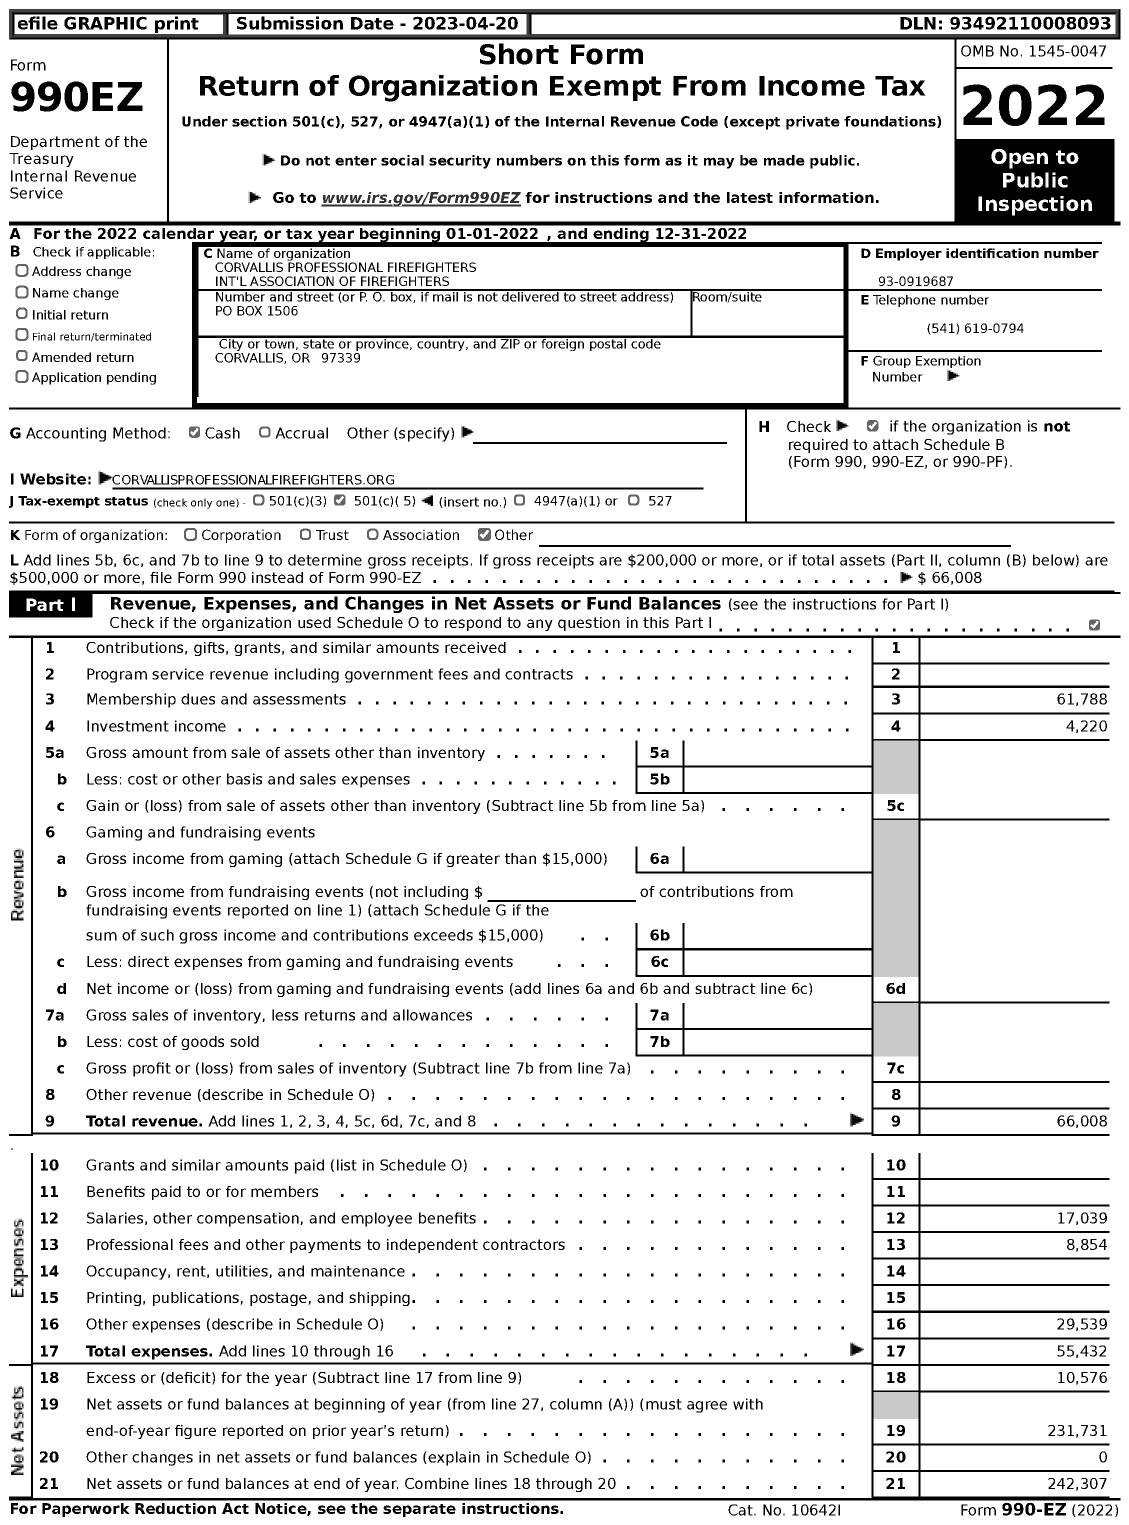 Image of first page of 2022 Form 990EZ for International Association of Fire Fighters - L2240 Corvallis